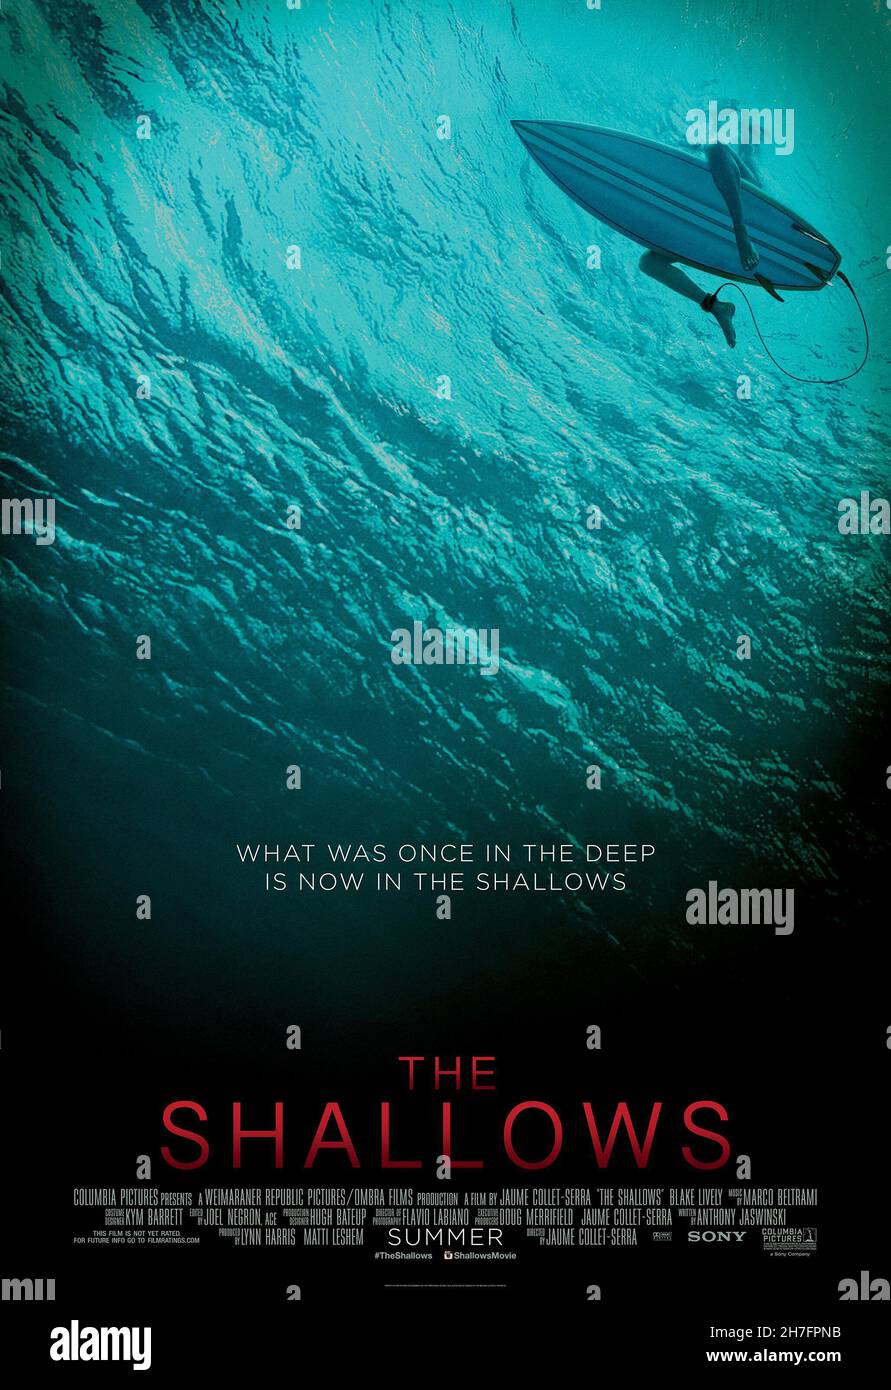 RELEASE DATE: June 29, 2016.TITLE: The Shallows.STUDIO: Columbia Pictures.DIRECTOR: Jaume Collet-Serra.PLOT: When Nancy (Blake Lively) is attacked by a great white shark while surfing alone, she is stranded just a short distance from shore. Though she is only 200 yards from her survival, getting there proves the ultimate contest of wills.PICTURED: Blake Lively as Nancy. (Credit: © Columbia Pictures/Entertainment Pictures) Stock Photo